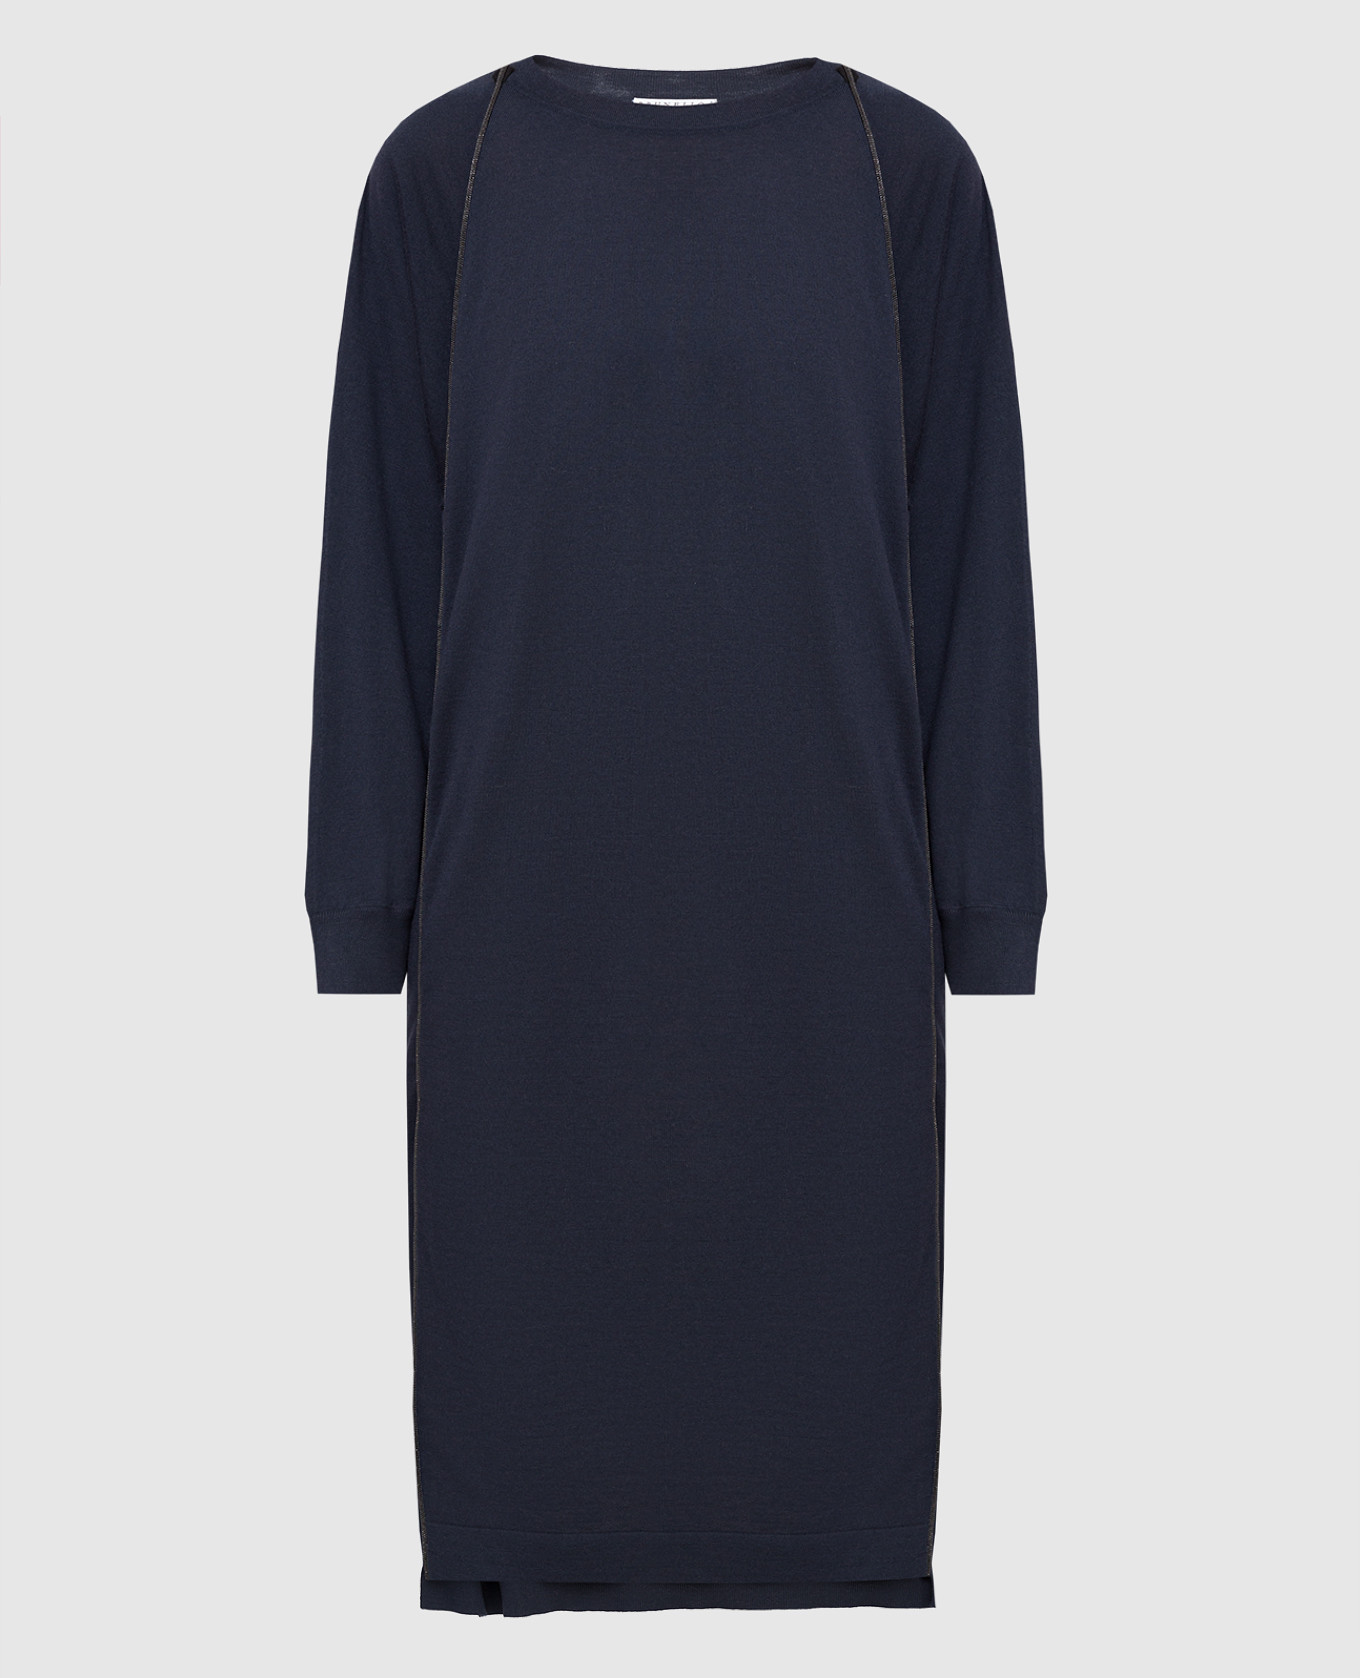 Navy blue wool and cashmere dress